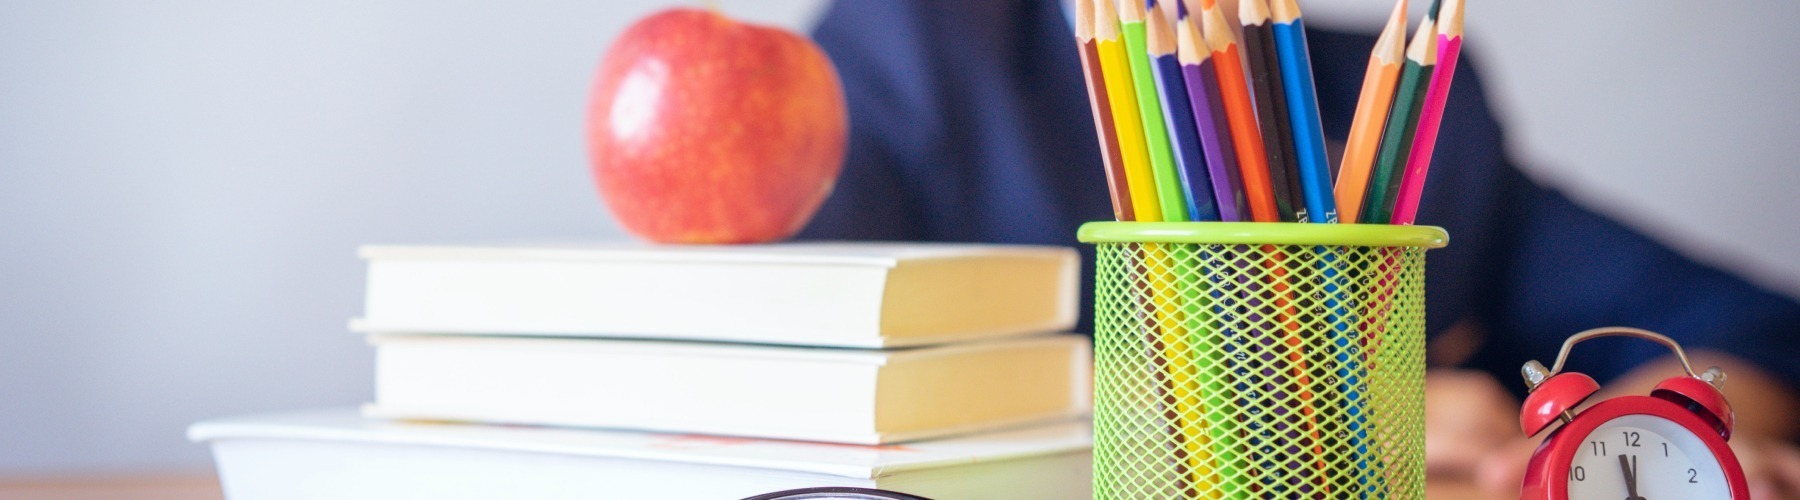 an apple on a stack of books next to a cup of pencils and an alarm clock, with a student in the background